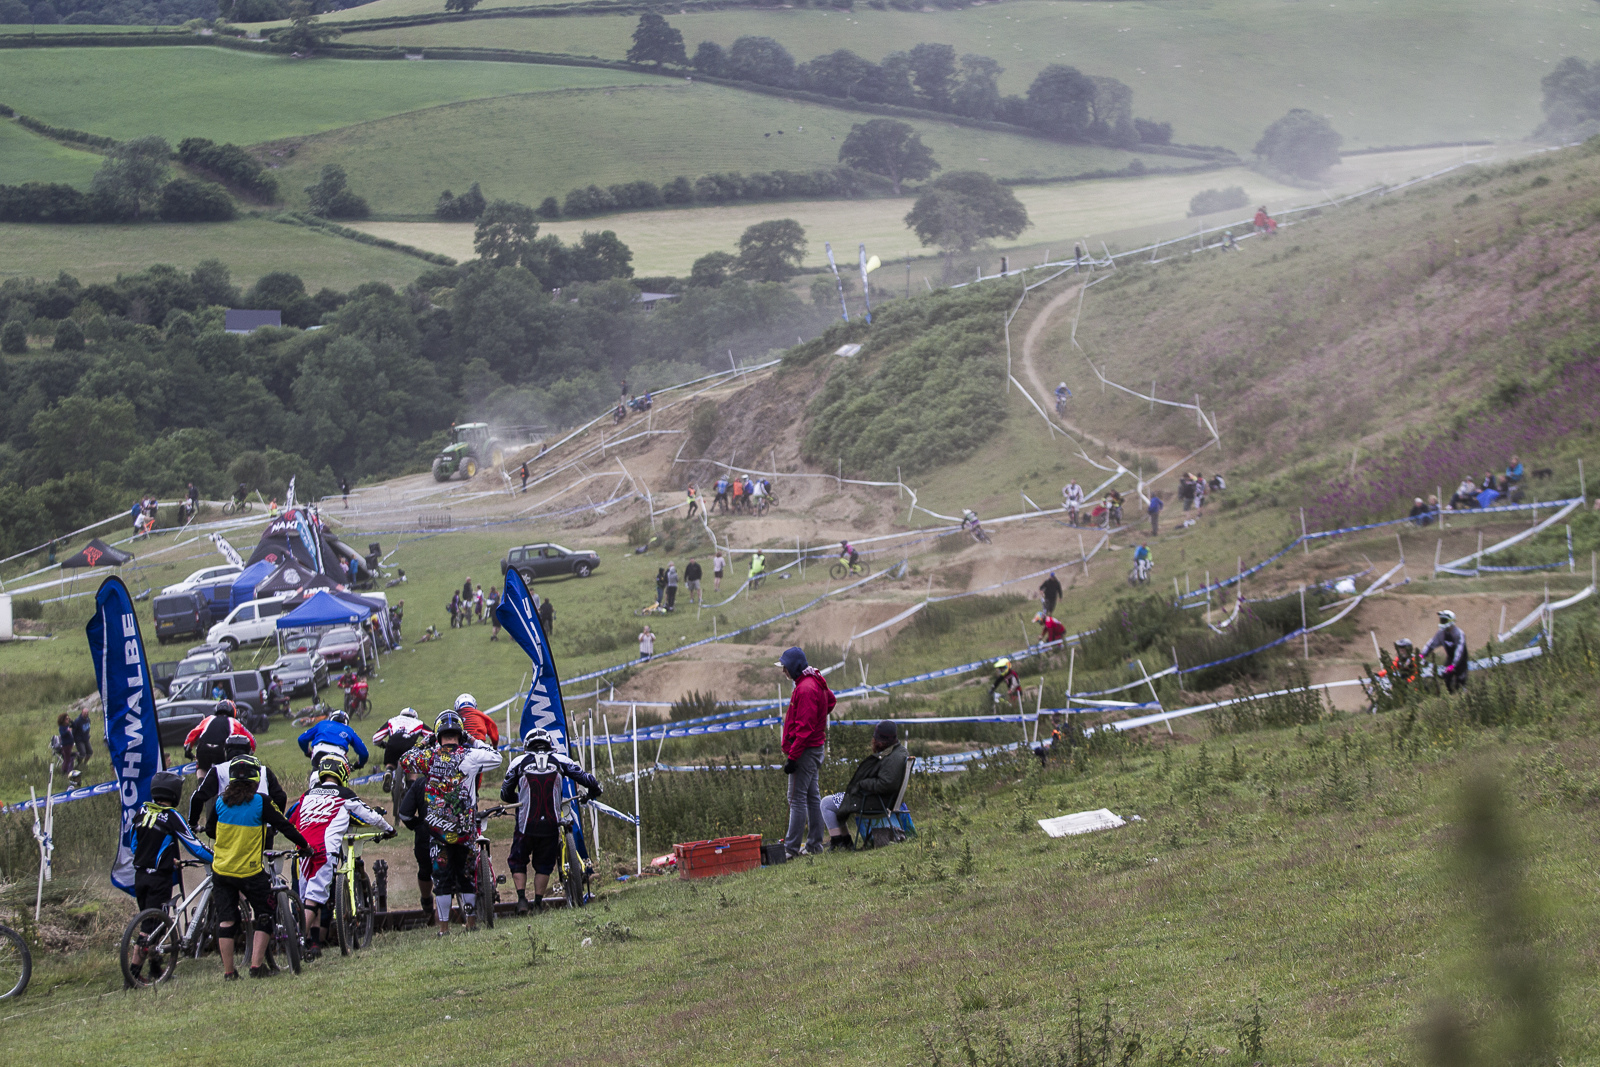 I had my doubts when I first seen the track, I certainly wasn't the only one! When push came to shove though it was one of the best tracks during The Schwalbe British 4X National Championship at Moelfre Hall, Moelfre, United Kingdom. 11July,2015 Photo: Charles Robertson